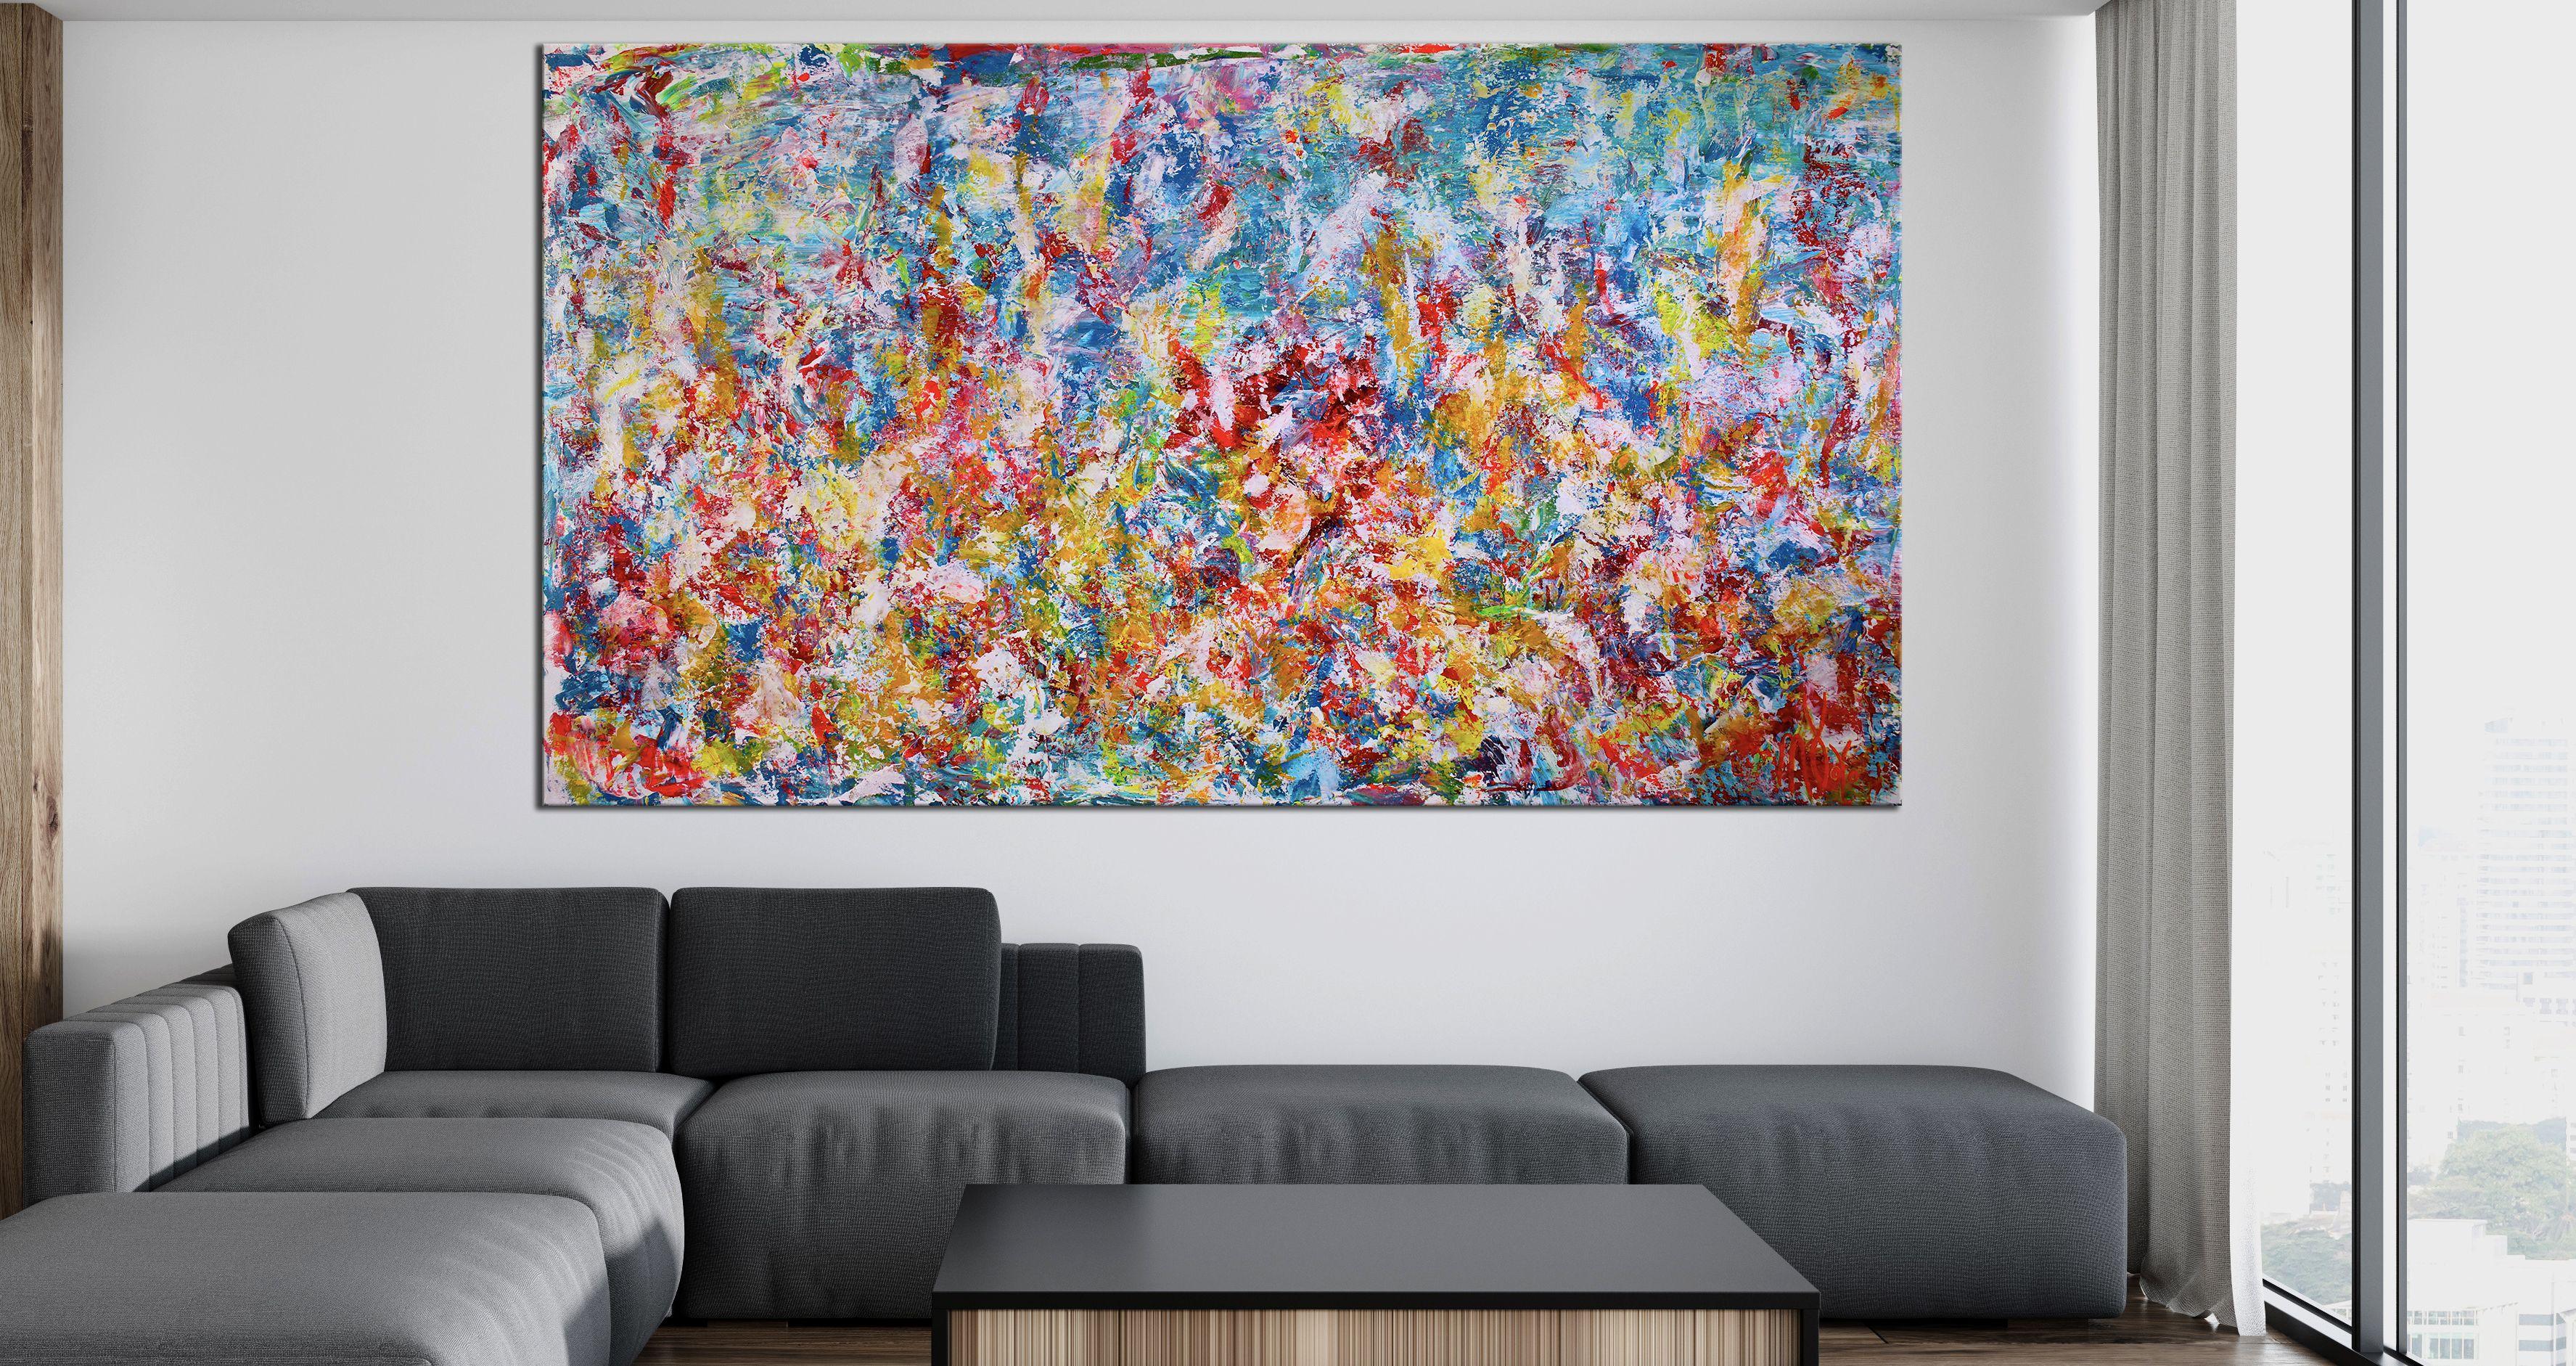 IMPACTFUL ABSTRACT INSPIRED BY NATURE!       Contrasting, bright color blending and textured with many shades of green, yellow tones and shades, bright orange, reds and lots of white. This is an iridescent painting mica particle were mixed with the